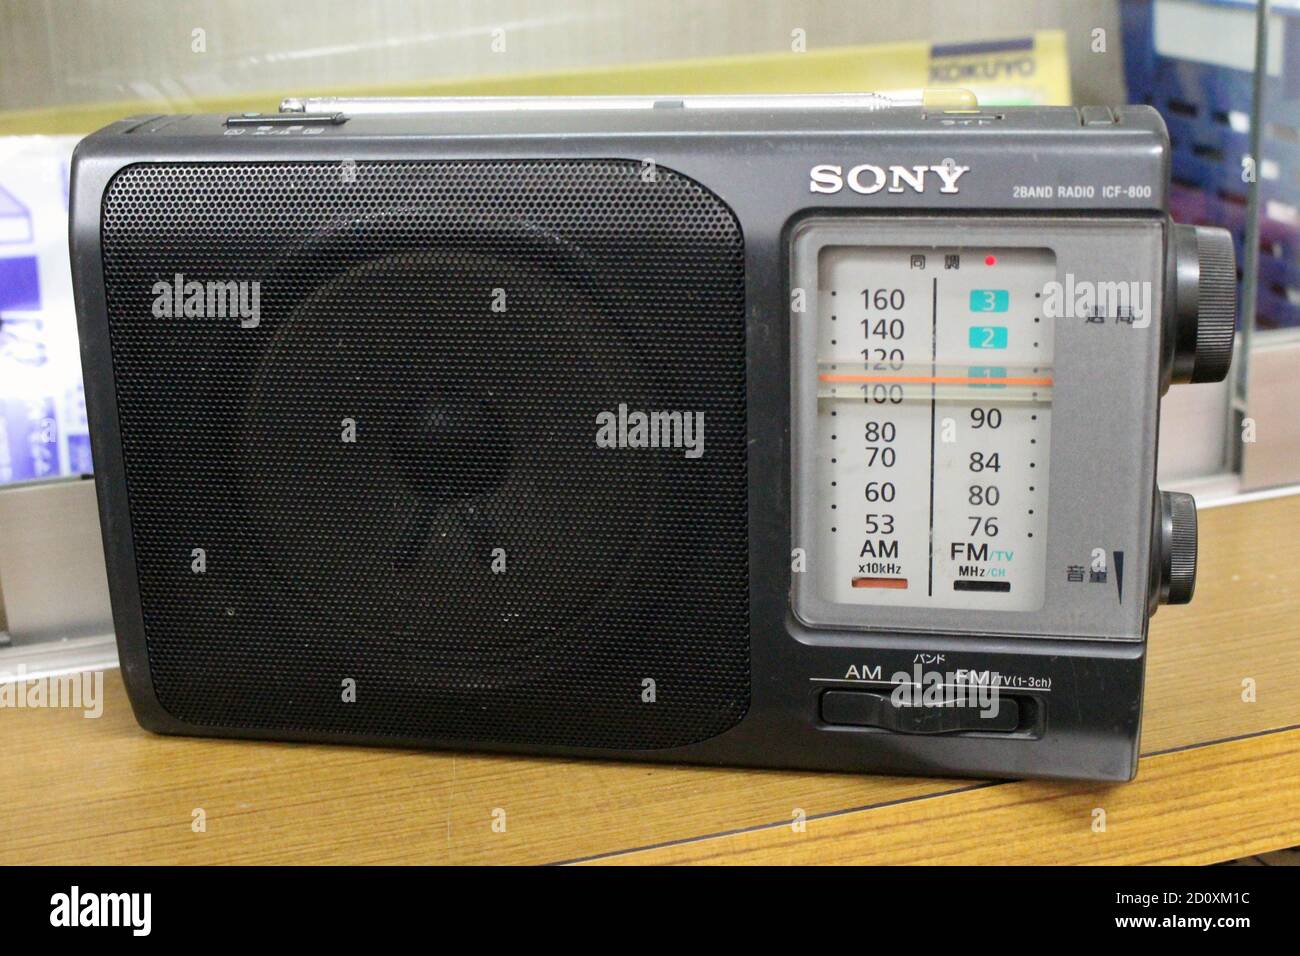 Old time radio, Japanese vintage product, Sony branded. Stock Photo